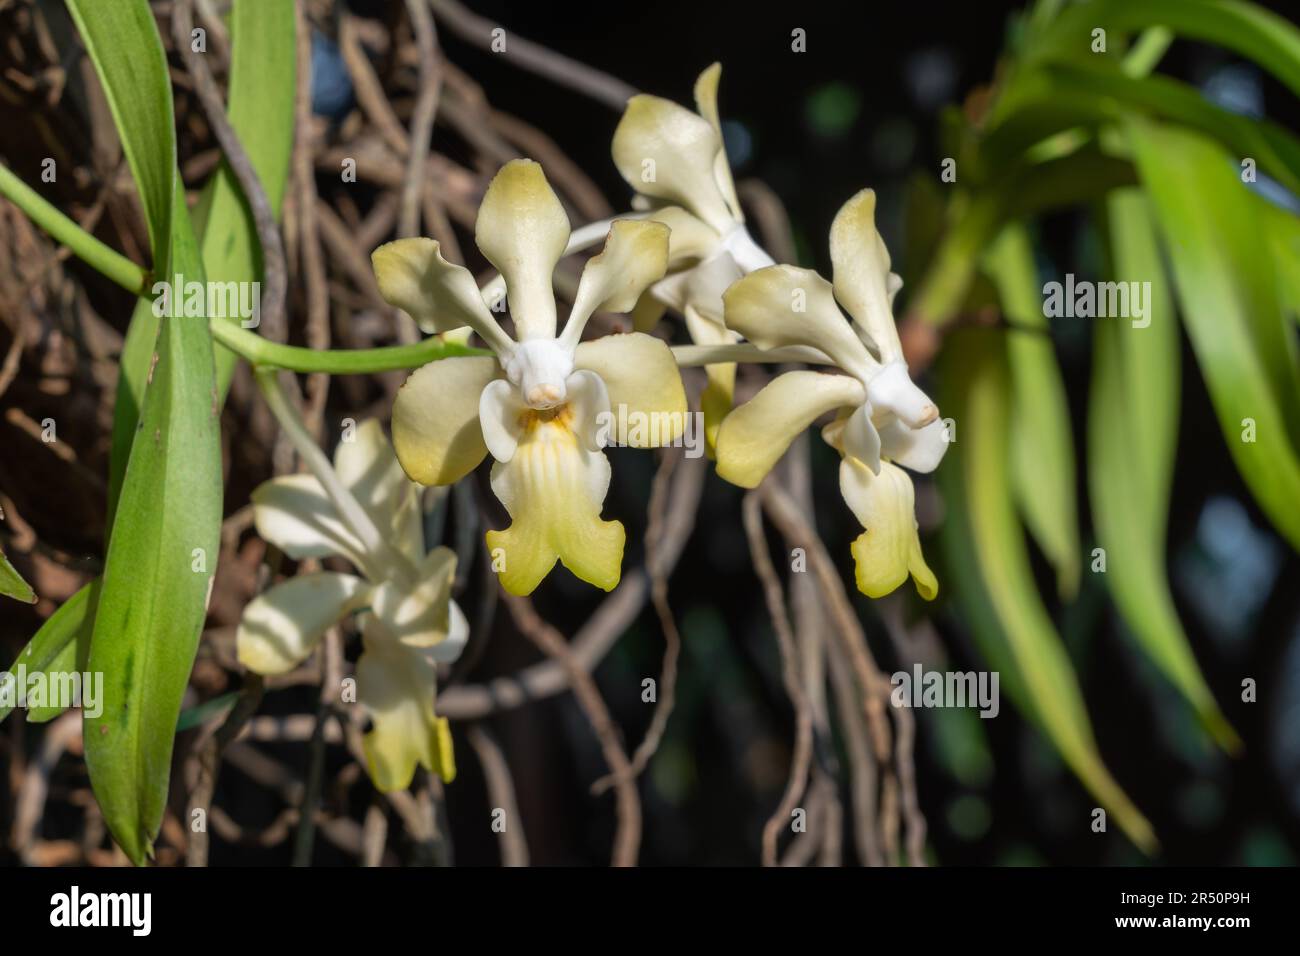 Closeup view of epiphytic orchid species vanda denisoniana yellow and white flowers blooming outdoors in tropical garden Stock Photo